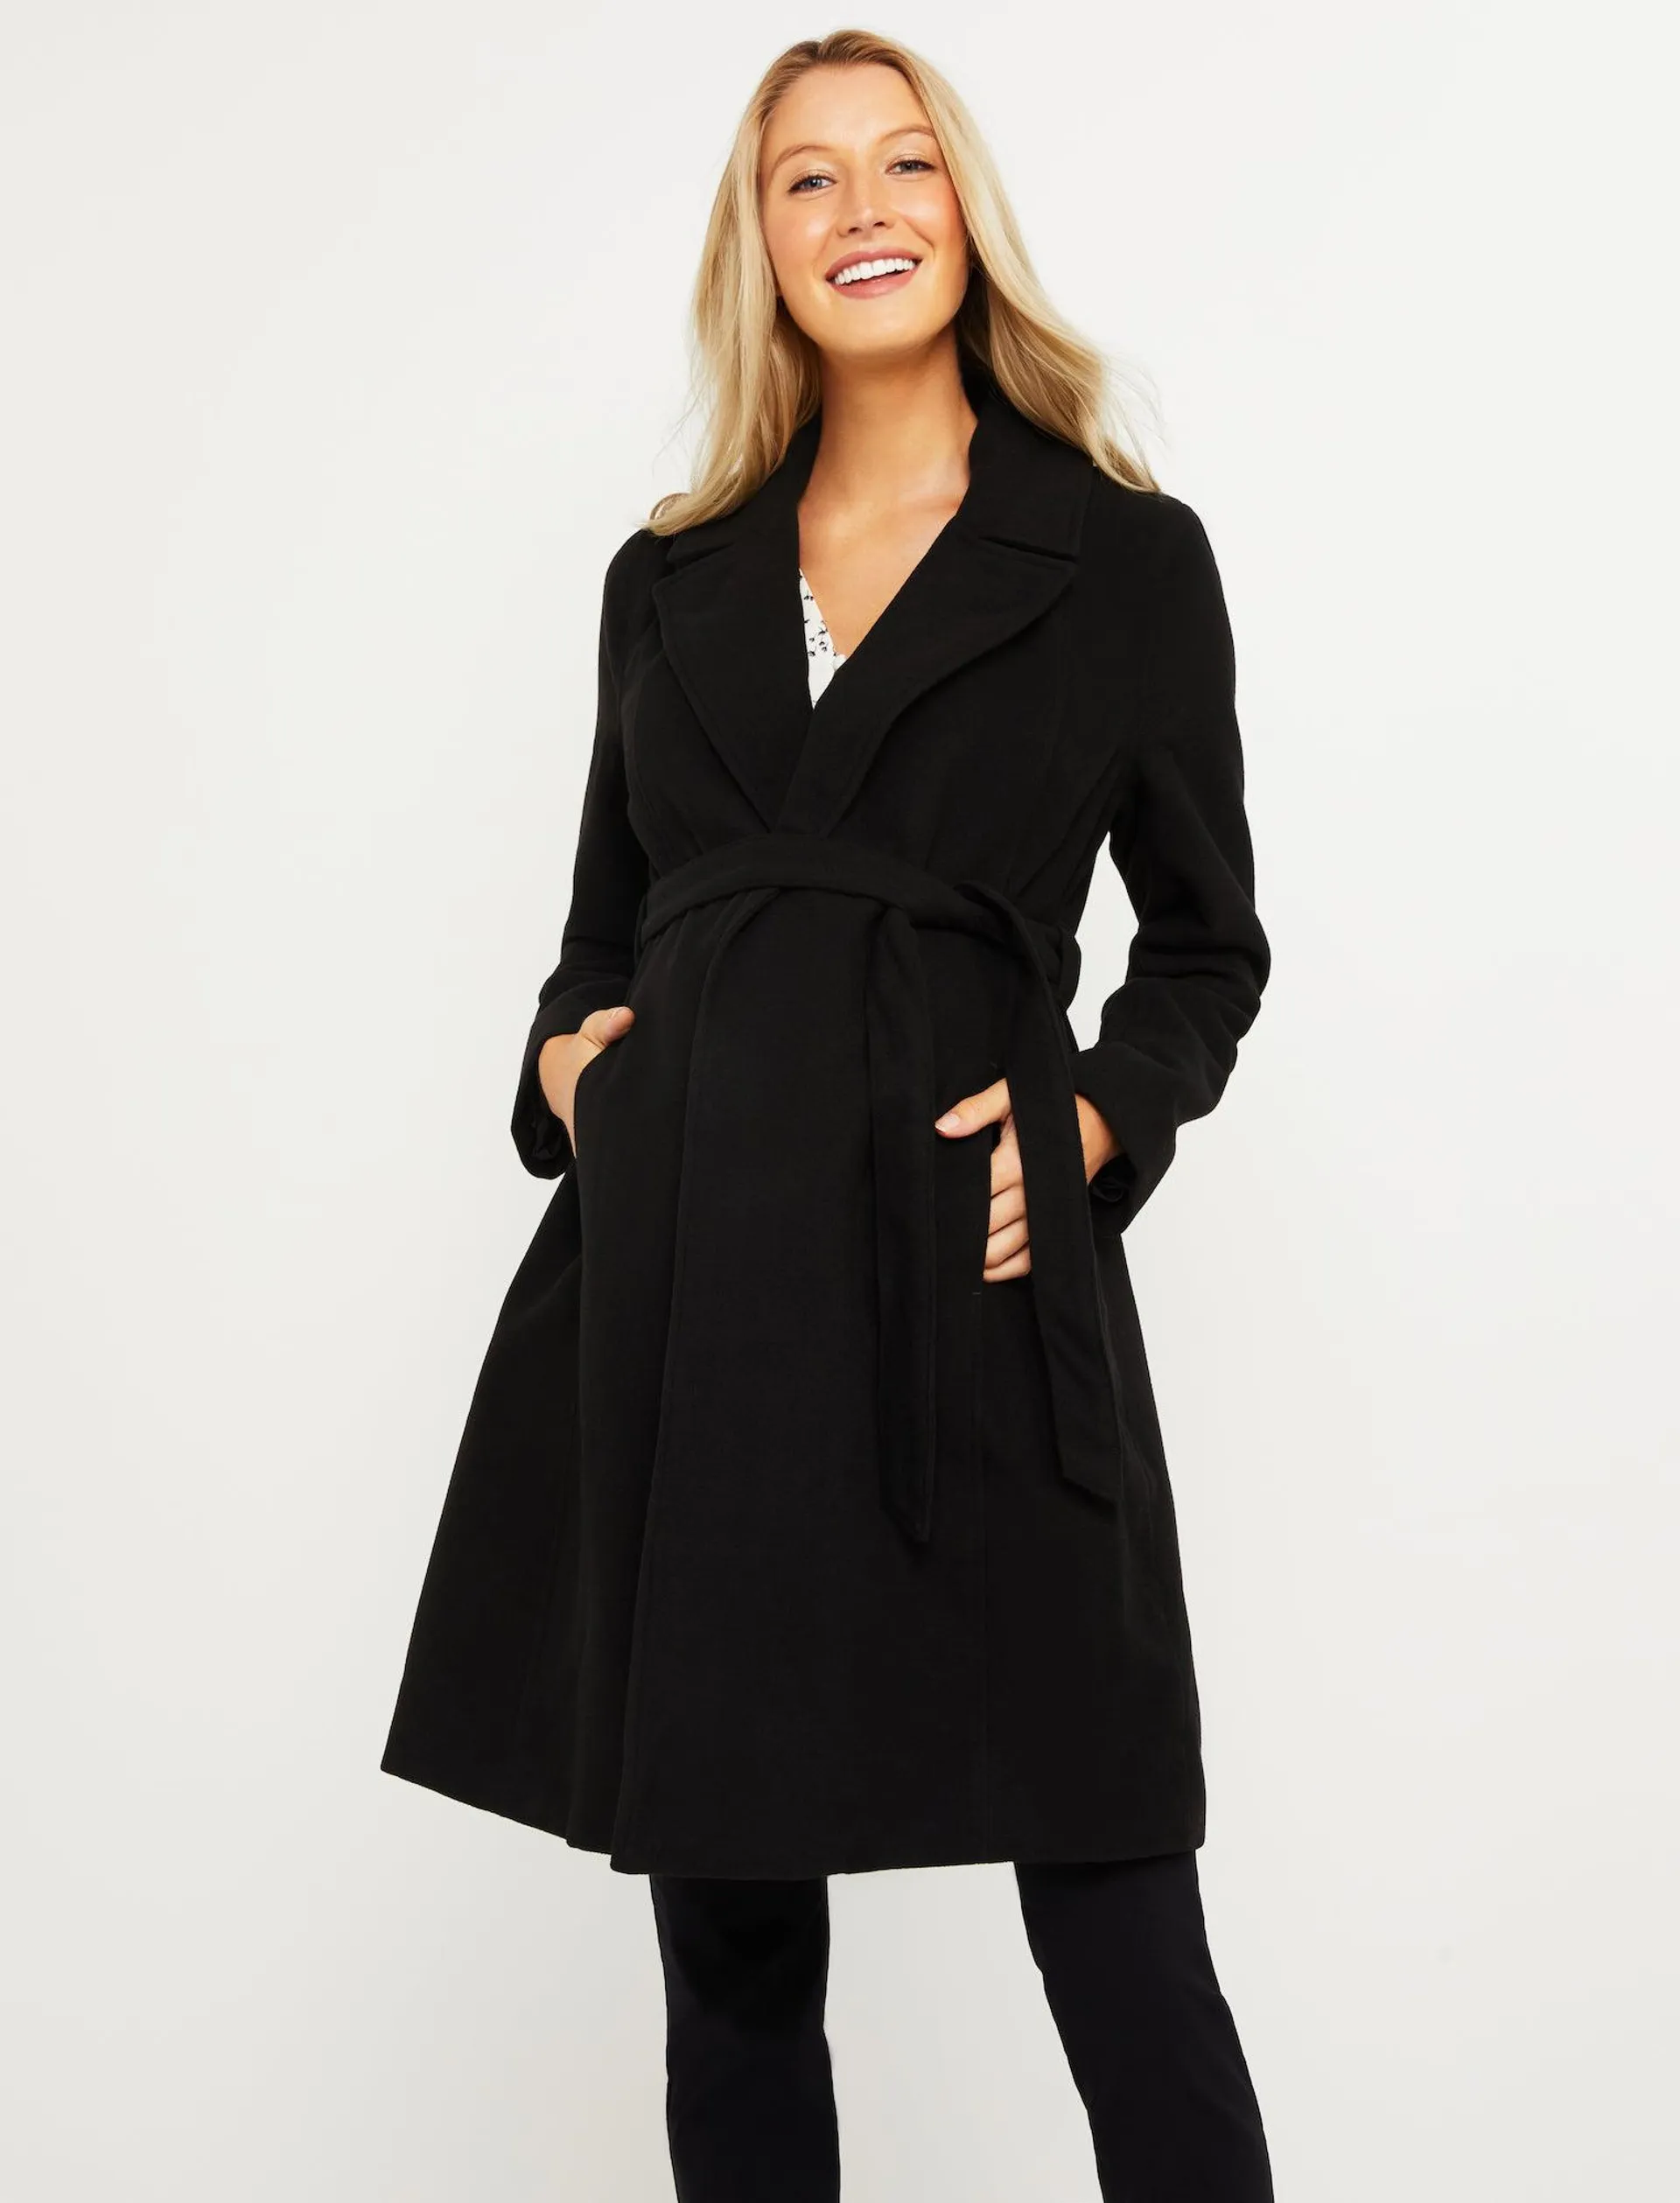 Belted Maternity Wrap Coat